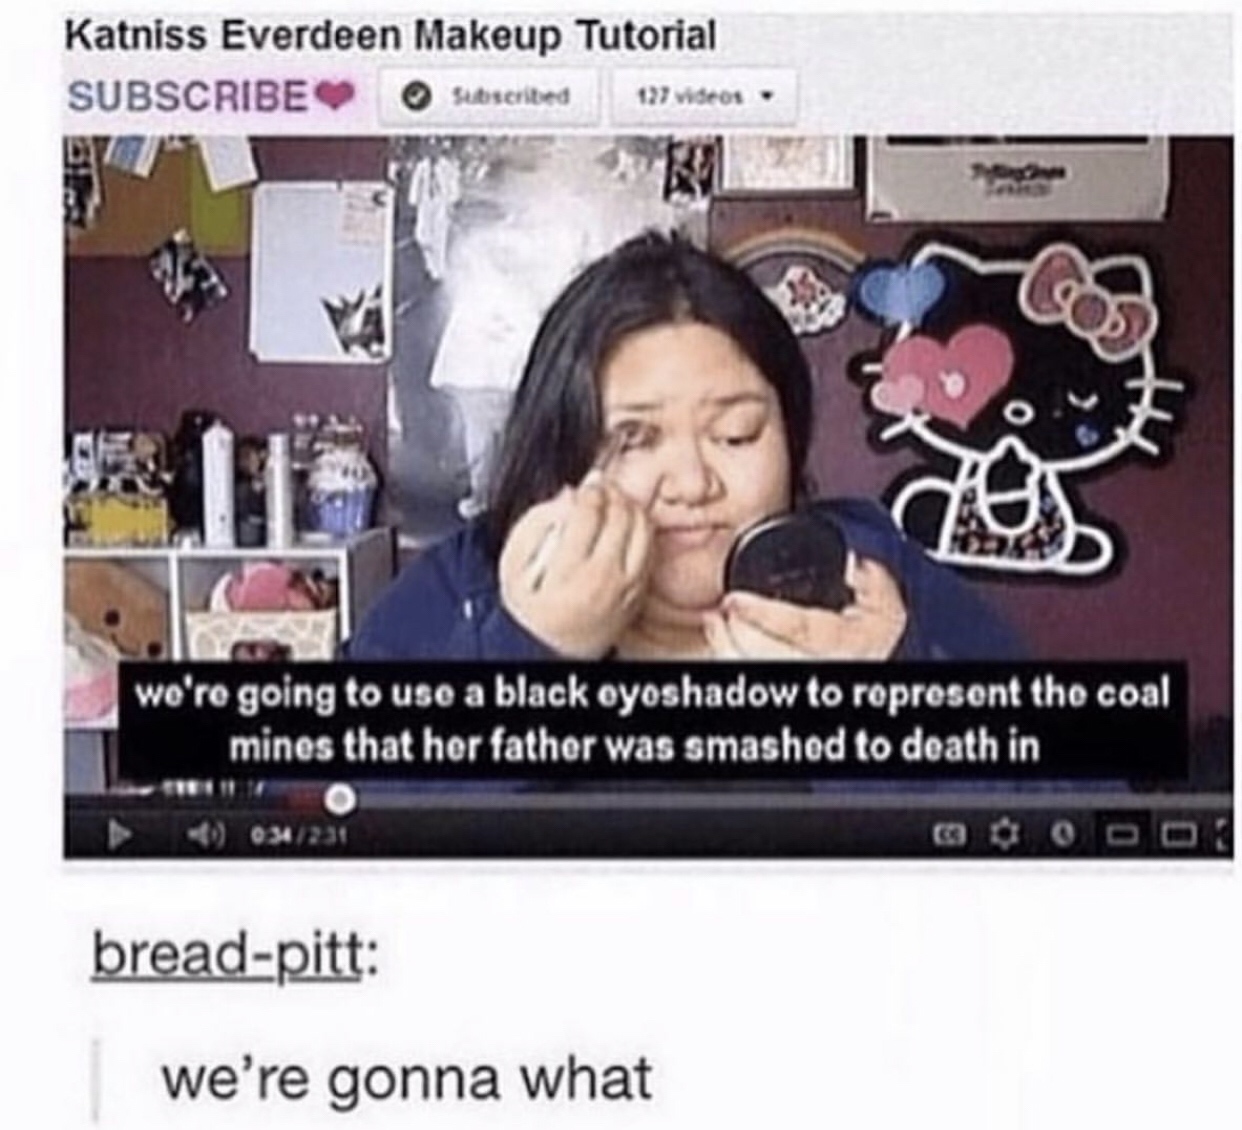 katniss makeup tutorial - Katniss Everdeen Makeup Tutorial Subscribe Subscribed 177 videos we're going to use a black oyoshadow to ropresent the coal mines that her father was smashed to death in 9 034231 breadpitt we're gonna what